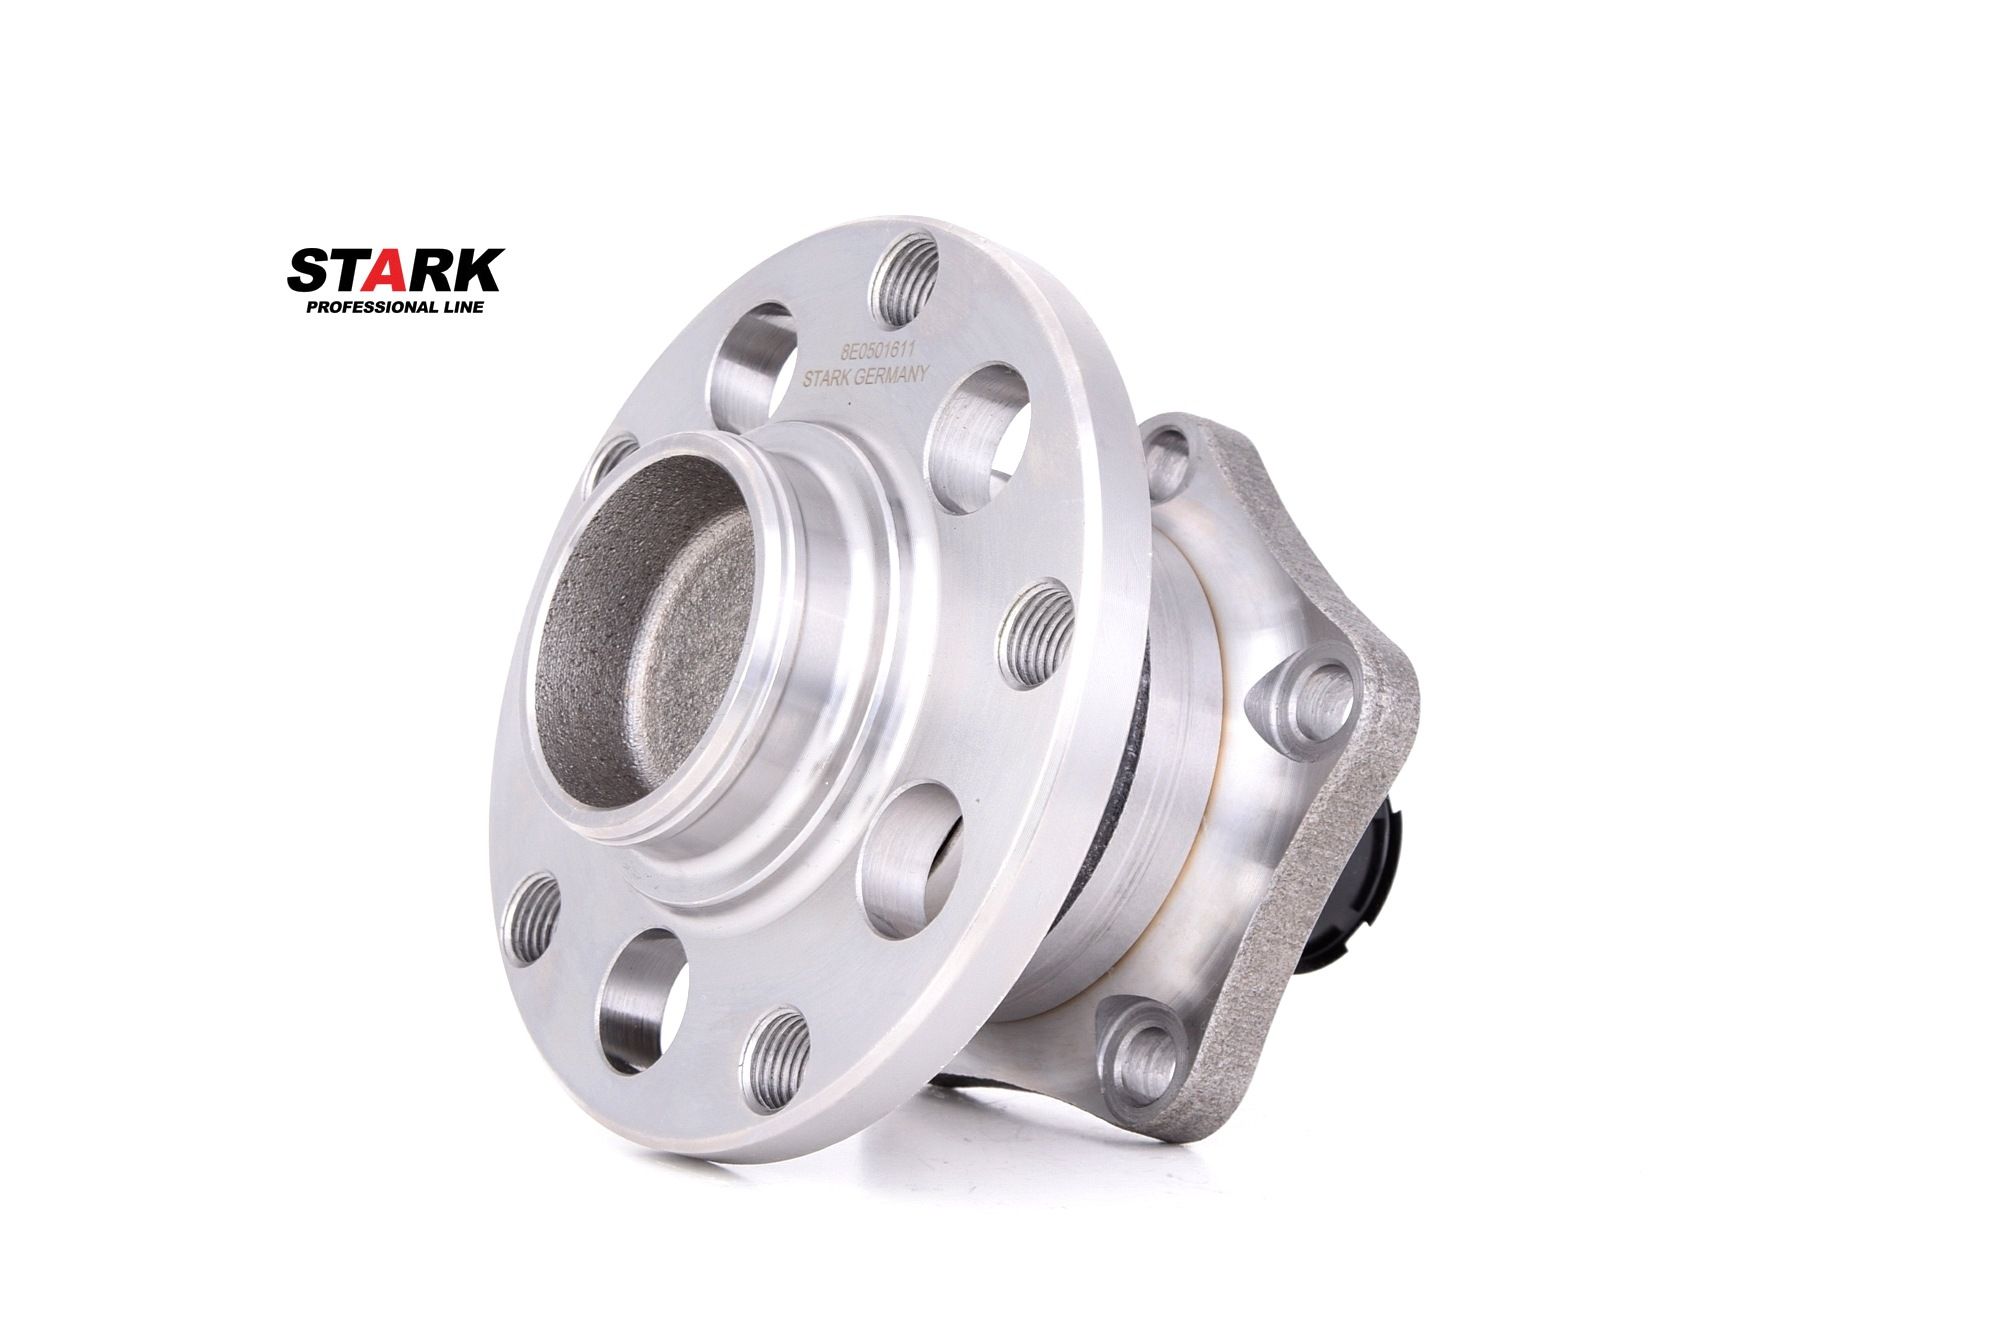 SKWB-0180067 STARK Wheel bearings VW Rear Axle both sides, with integrated wheel bearing, 131 mm